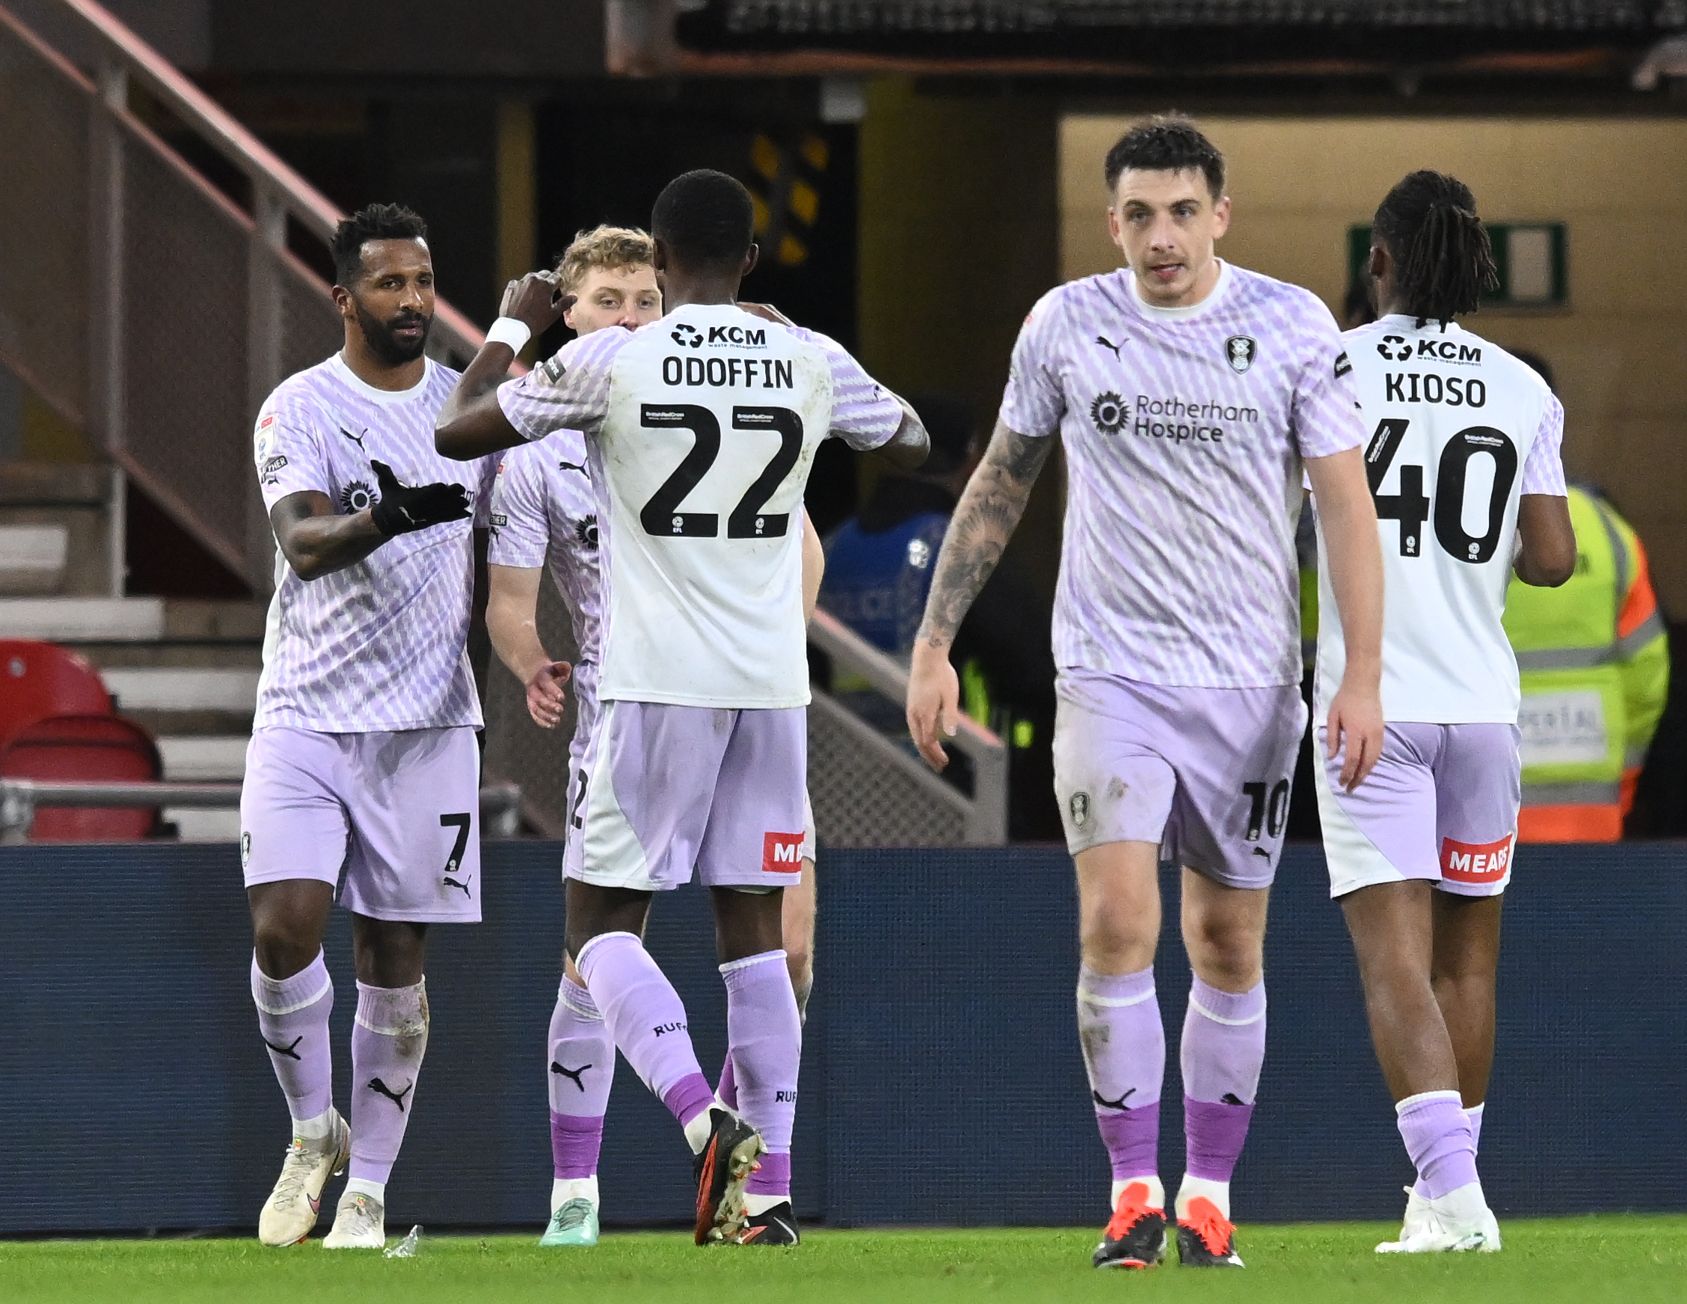 Rotherham United players celebrate scoring a goal in their away kit